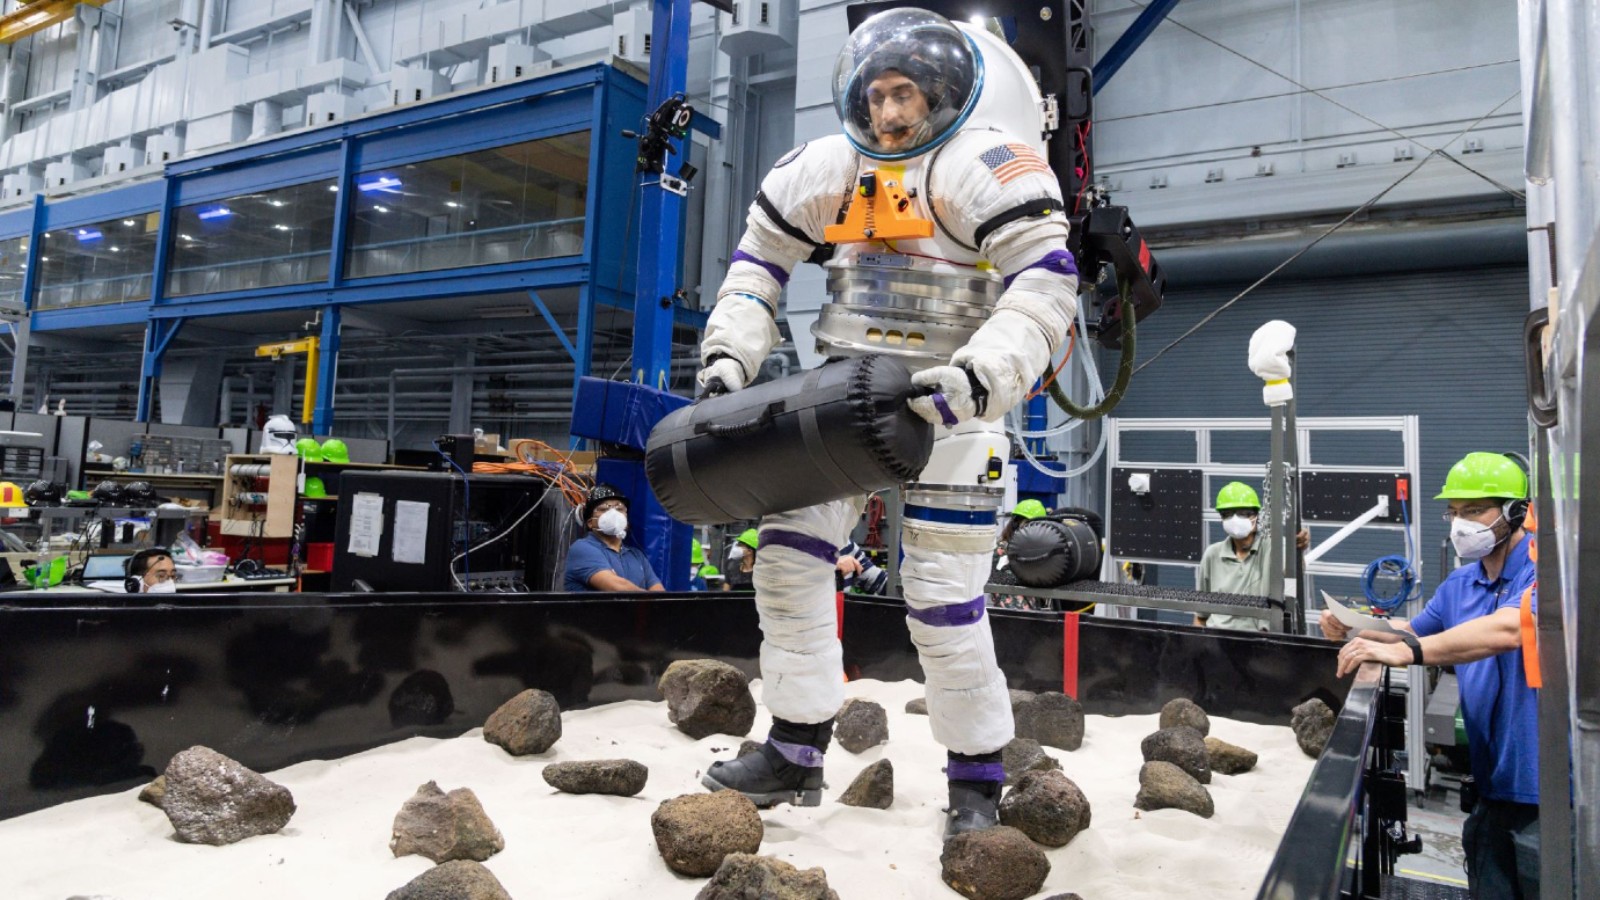 Obstacle course tests NASA astronauts' mission readiness after